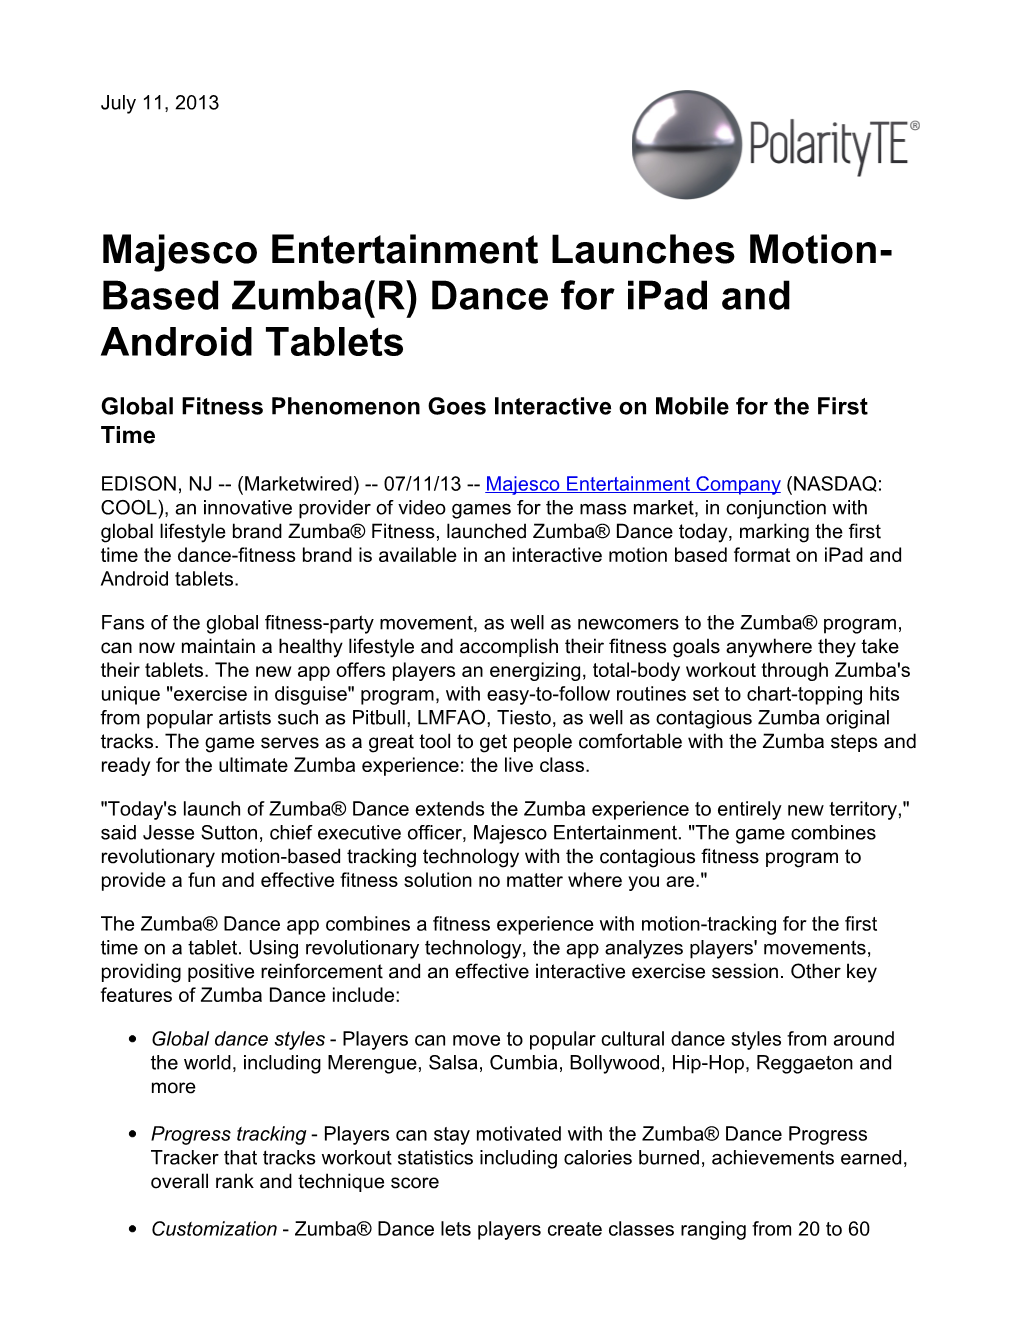 Majesco Entertainment Launches Motion- Based Zumba(R) Dance for Ipad and Android Tablets